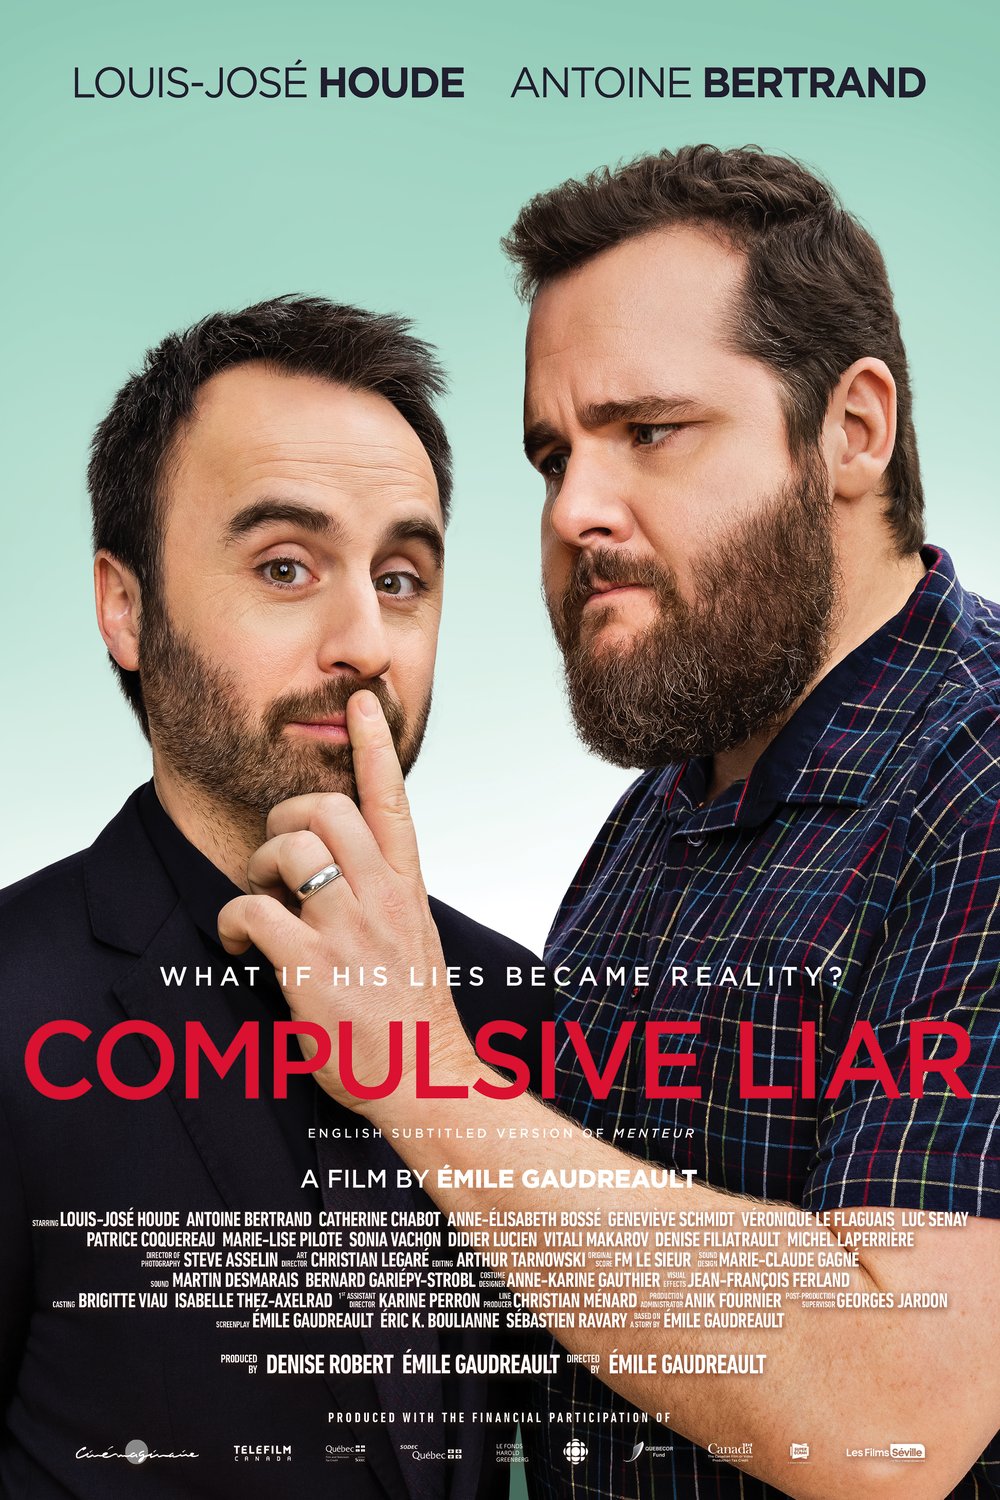 Poster of the movie Compulsive liar